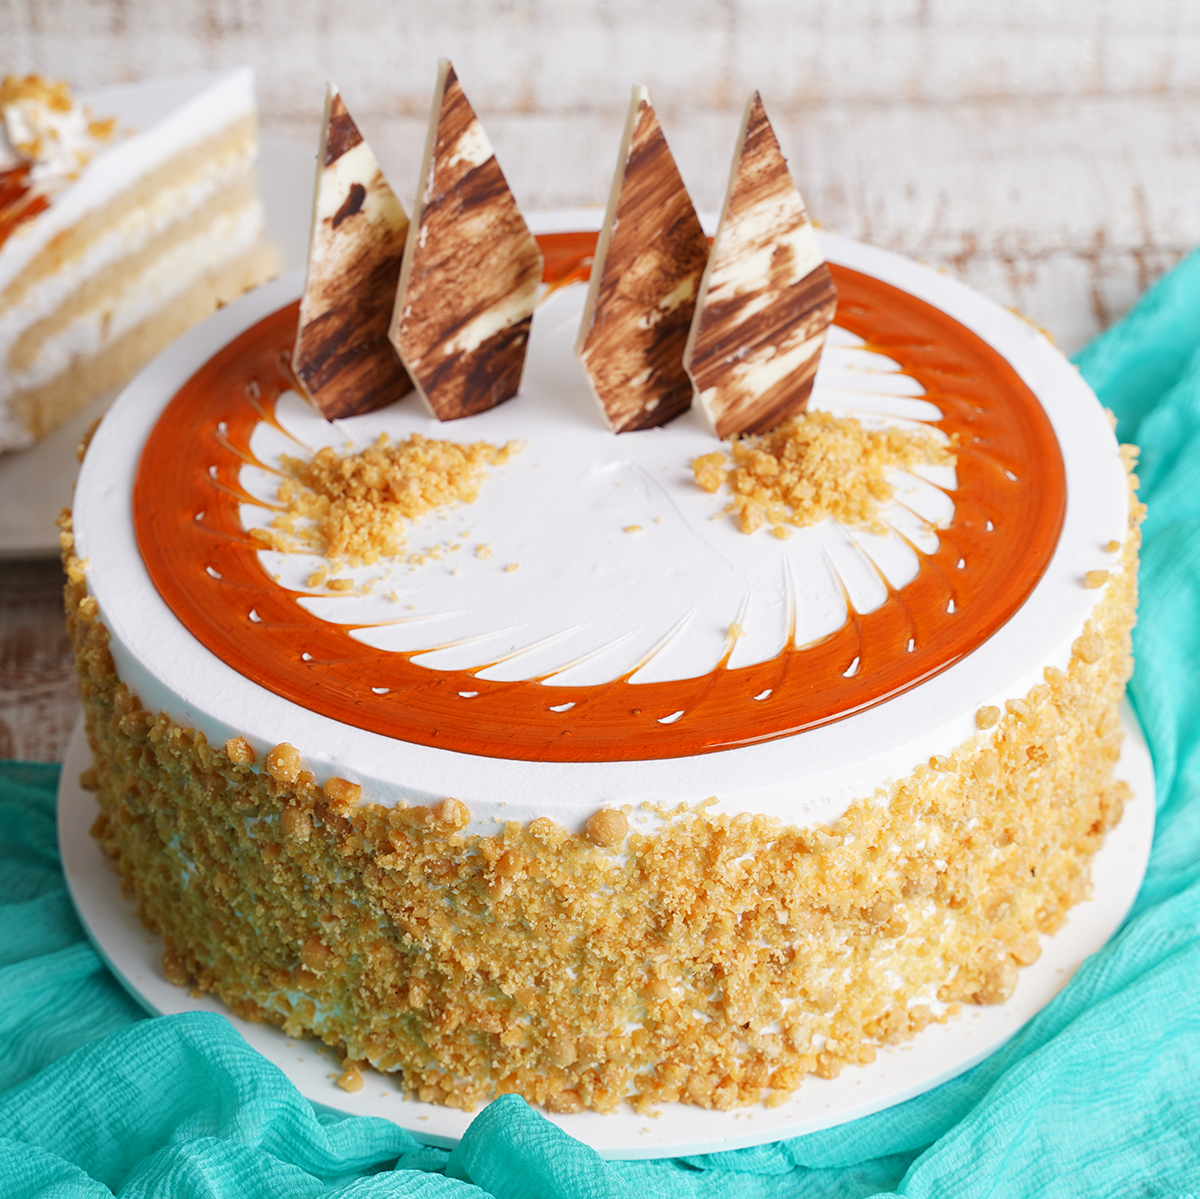 Send Crunchy Butterscotch Cake With Rakhi Online in India at Indiagift.in